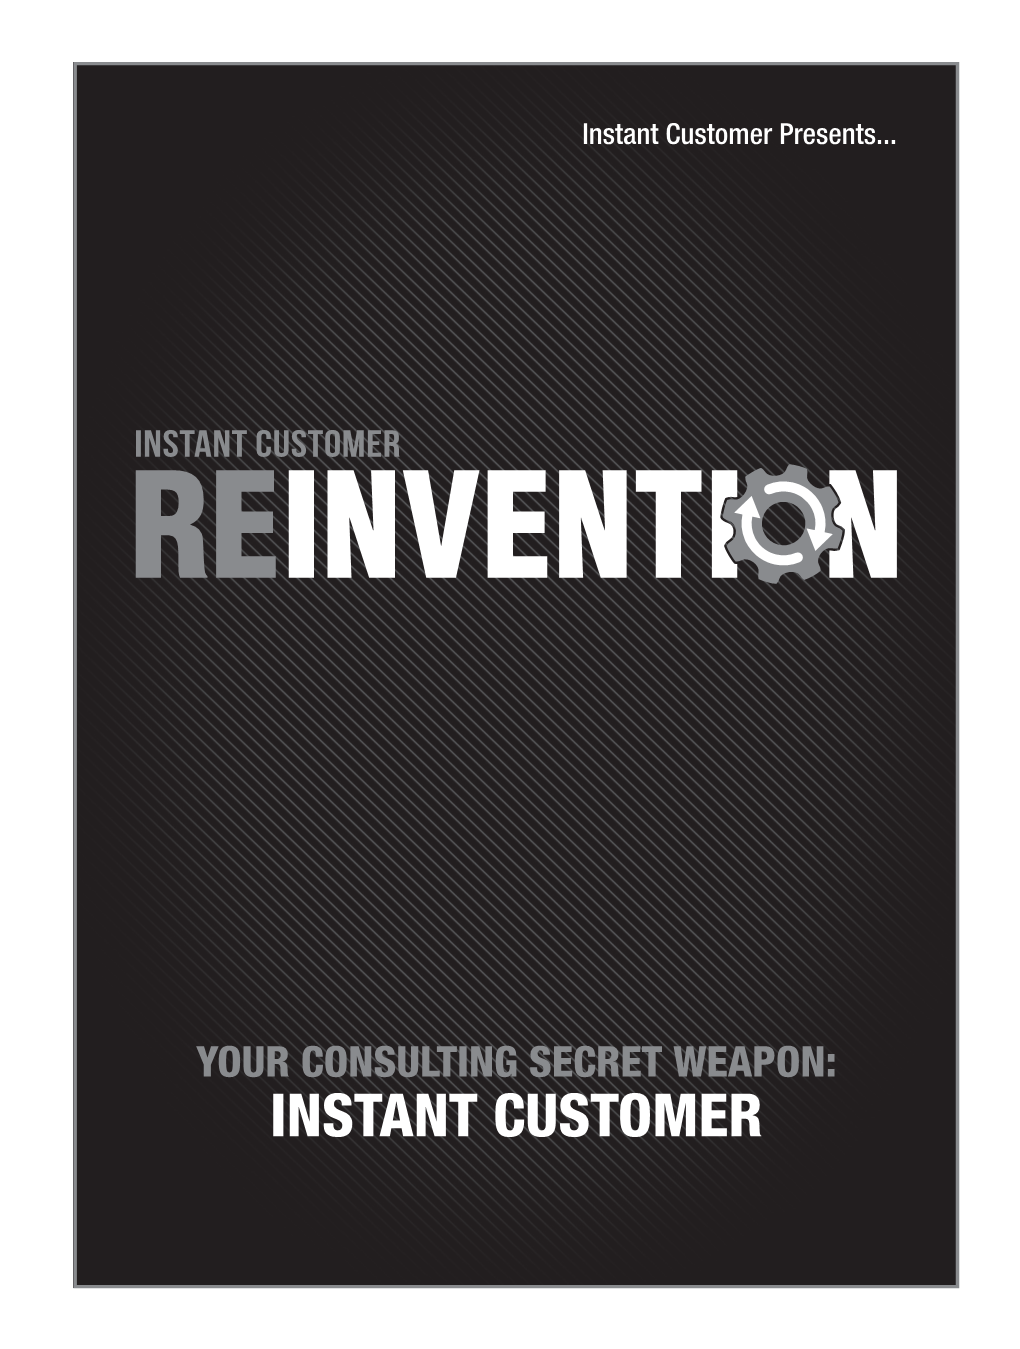 Your Consulting Secret Weapon: Instant Customer INSTANT CUSTOMER